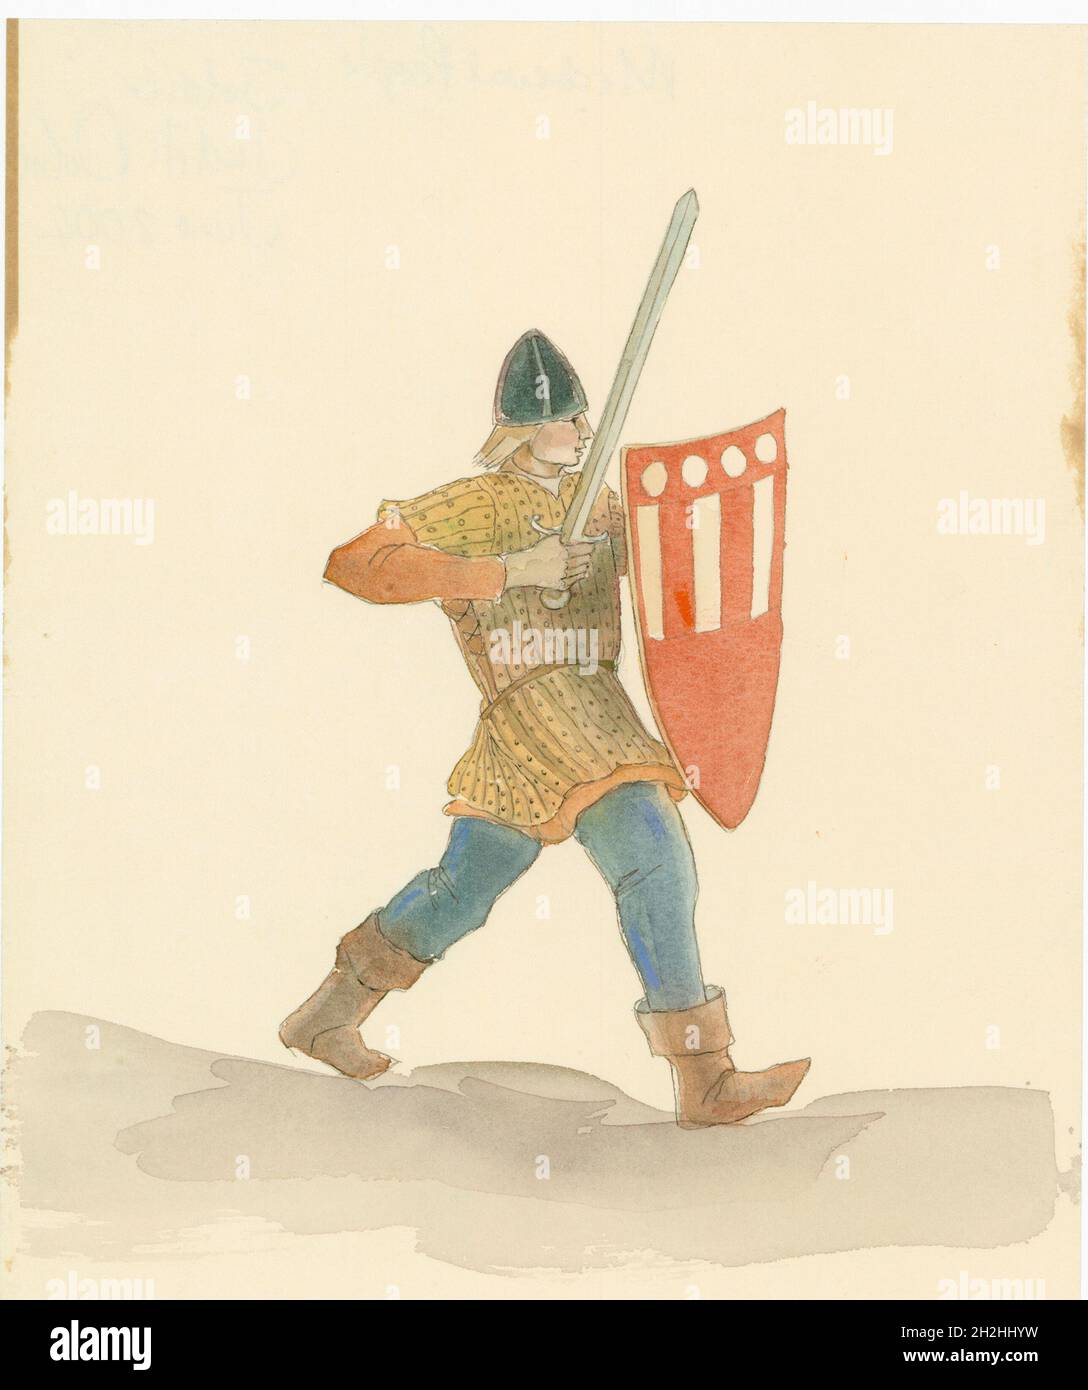 A medieval soldier carrying a long sword in his right hand and a shield in his left, 2004. A reconstruction drawing of a medieval soldier carrying a long sword in his right hand and a shield in his left. Stock Photo